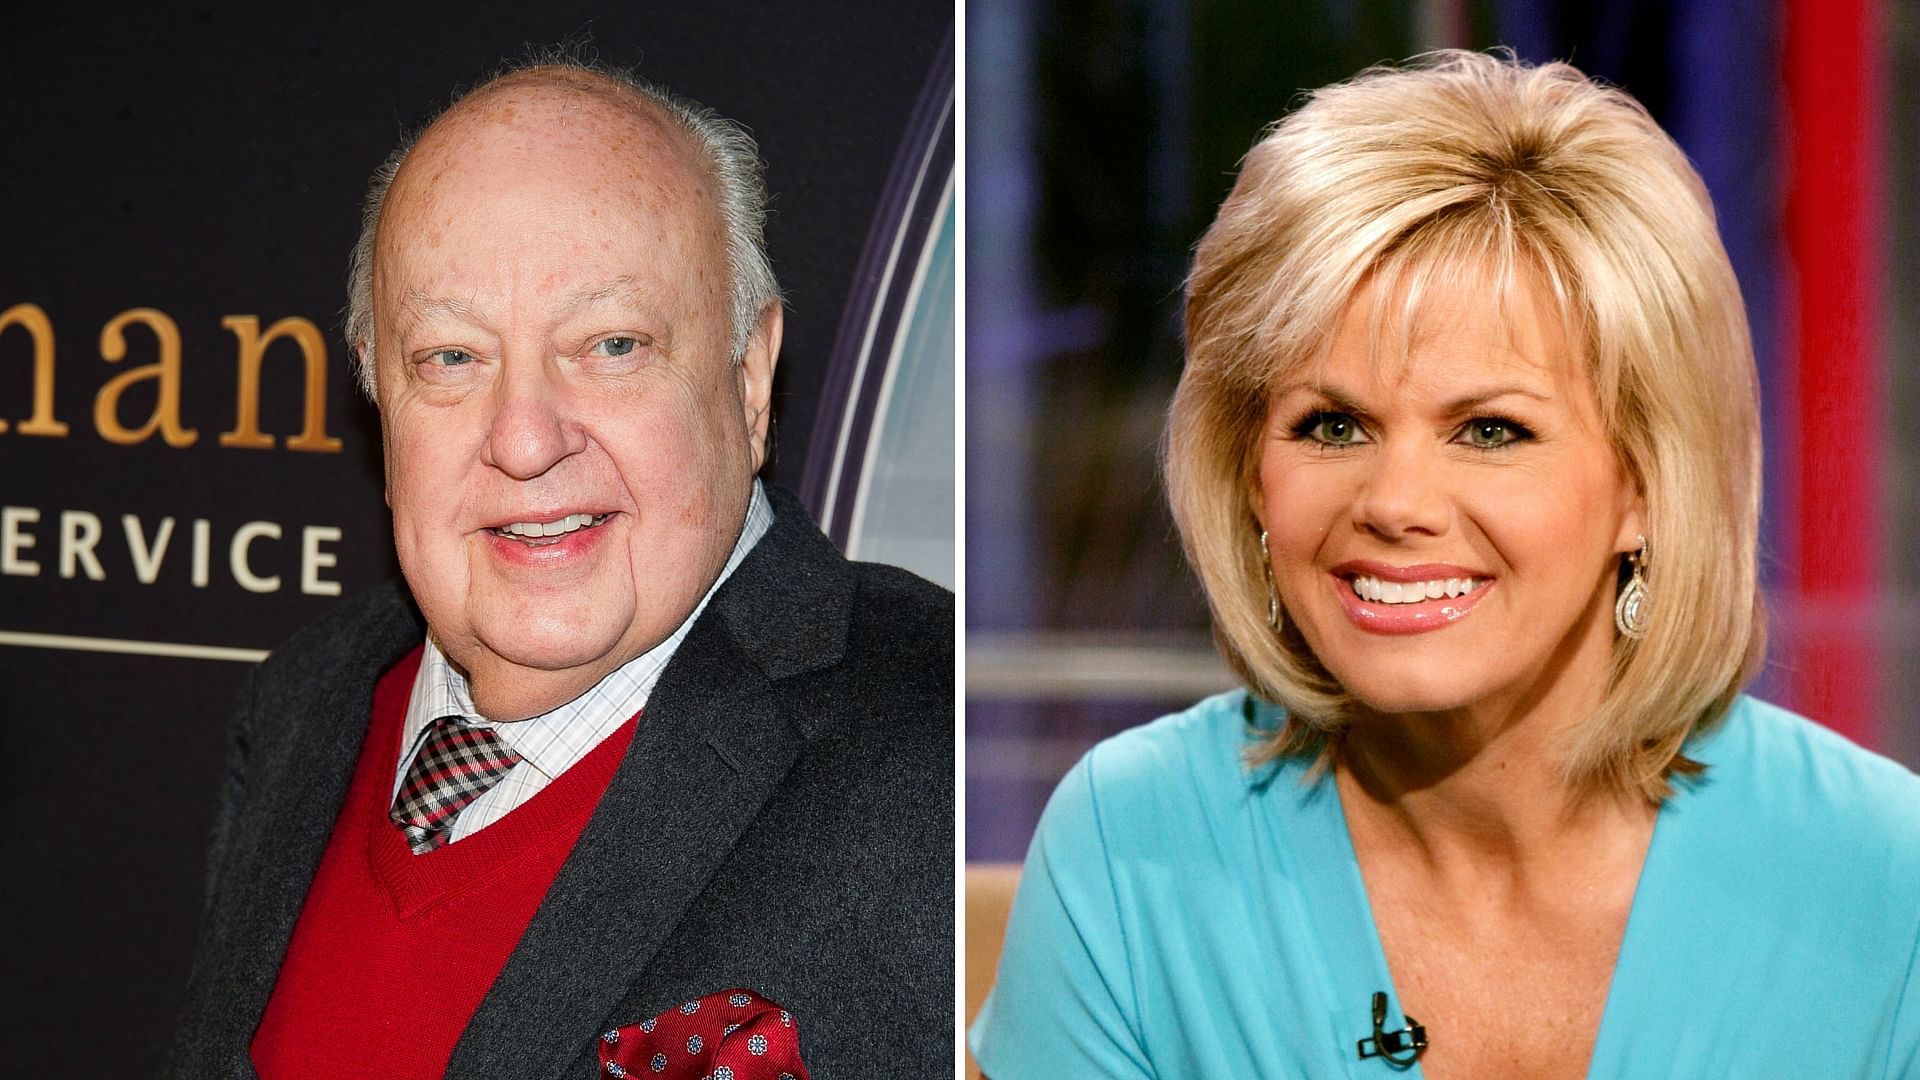 Fox News Chief Roger Ailes (L) and Fox News anchor Gretchen Carlson. (Photo: AP/Altered by <b>The Quint</b>)